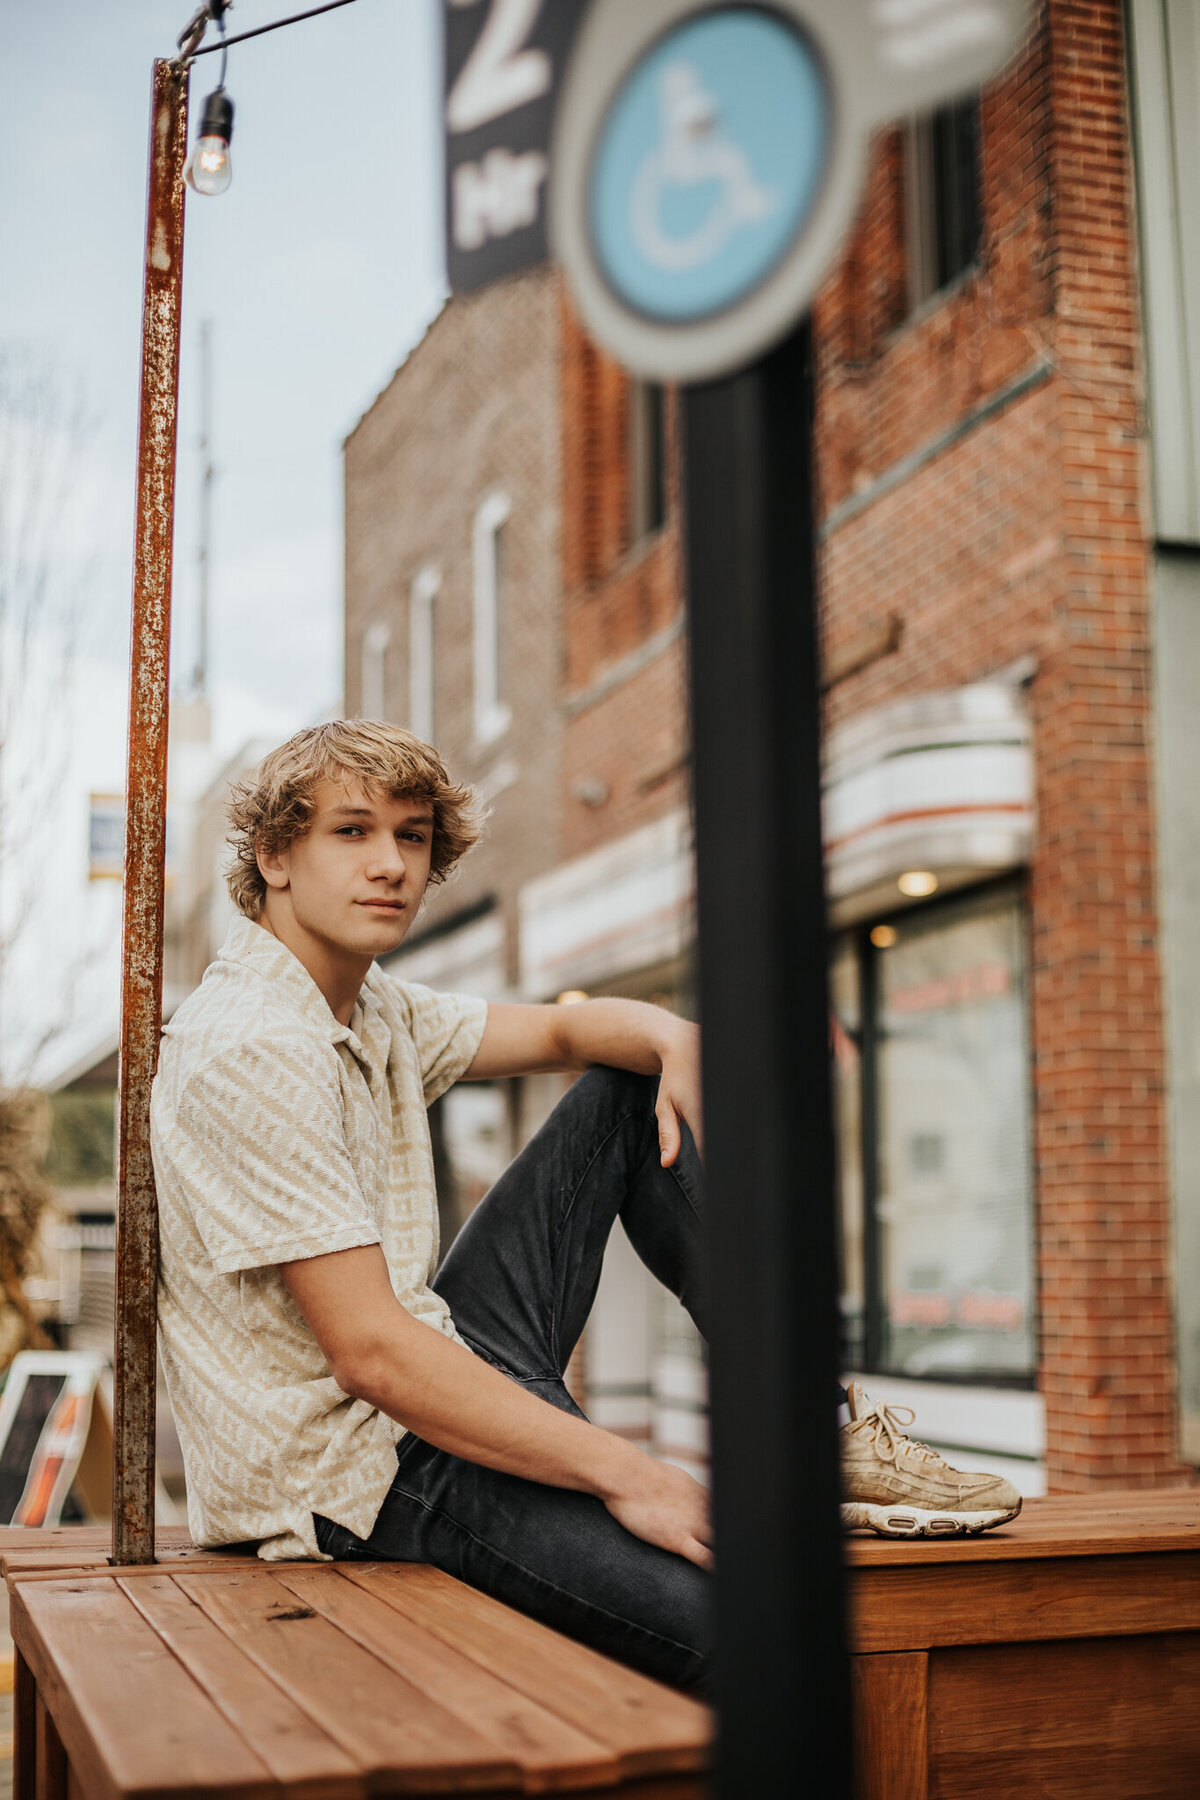 Senior session downtown Warsaw, IN